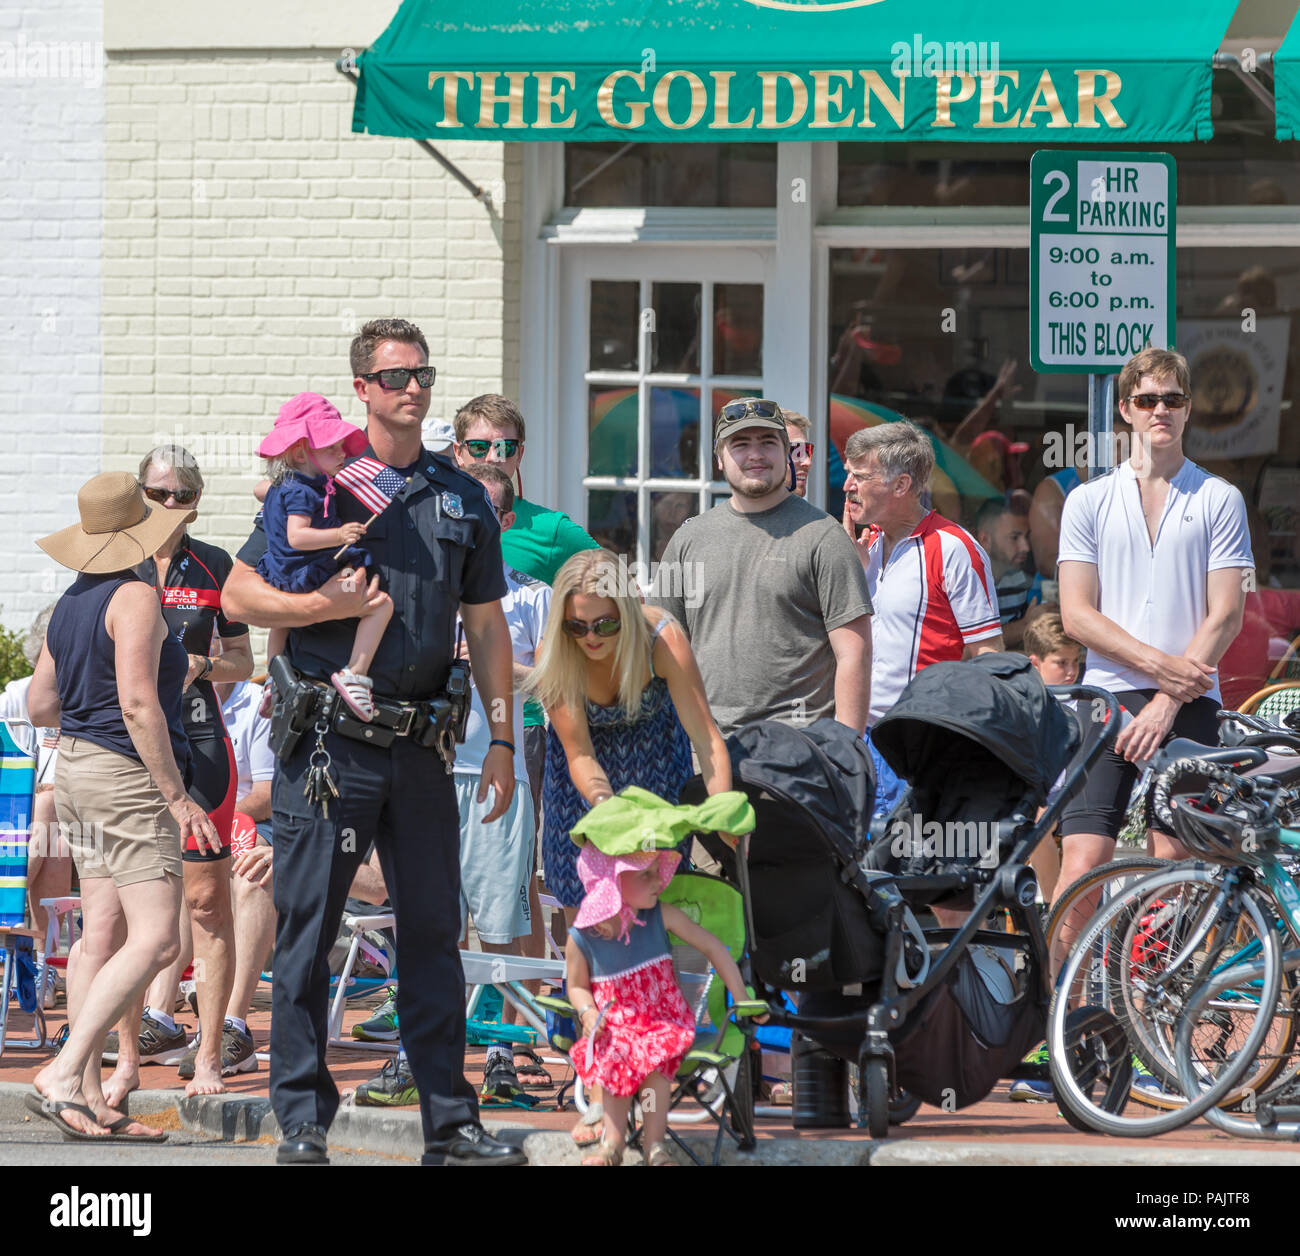 police officer holding a baby and other people awaiting the start of a fourth of July parade in Southampton, NY Stock Photo